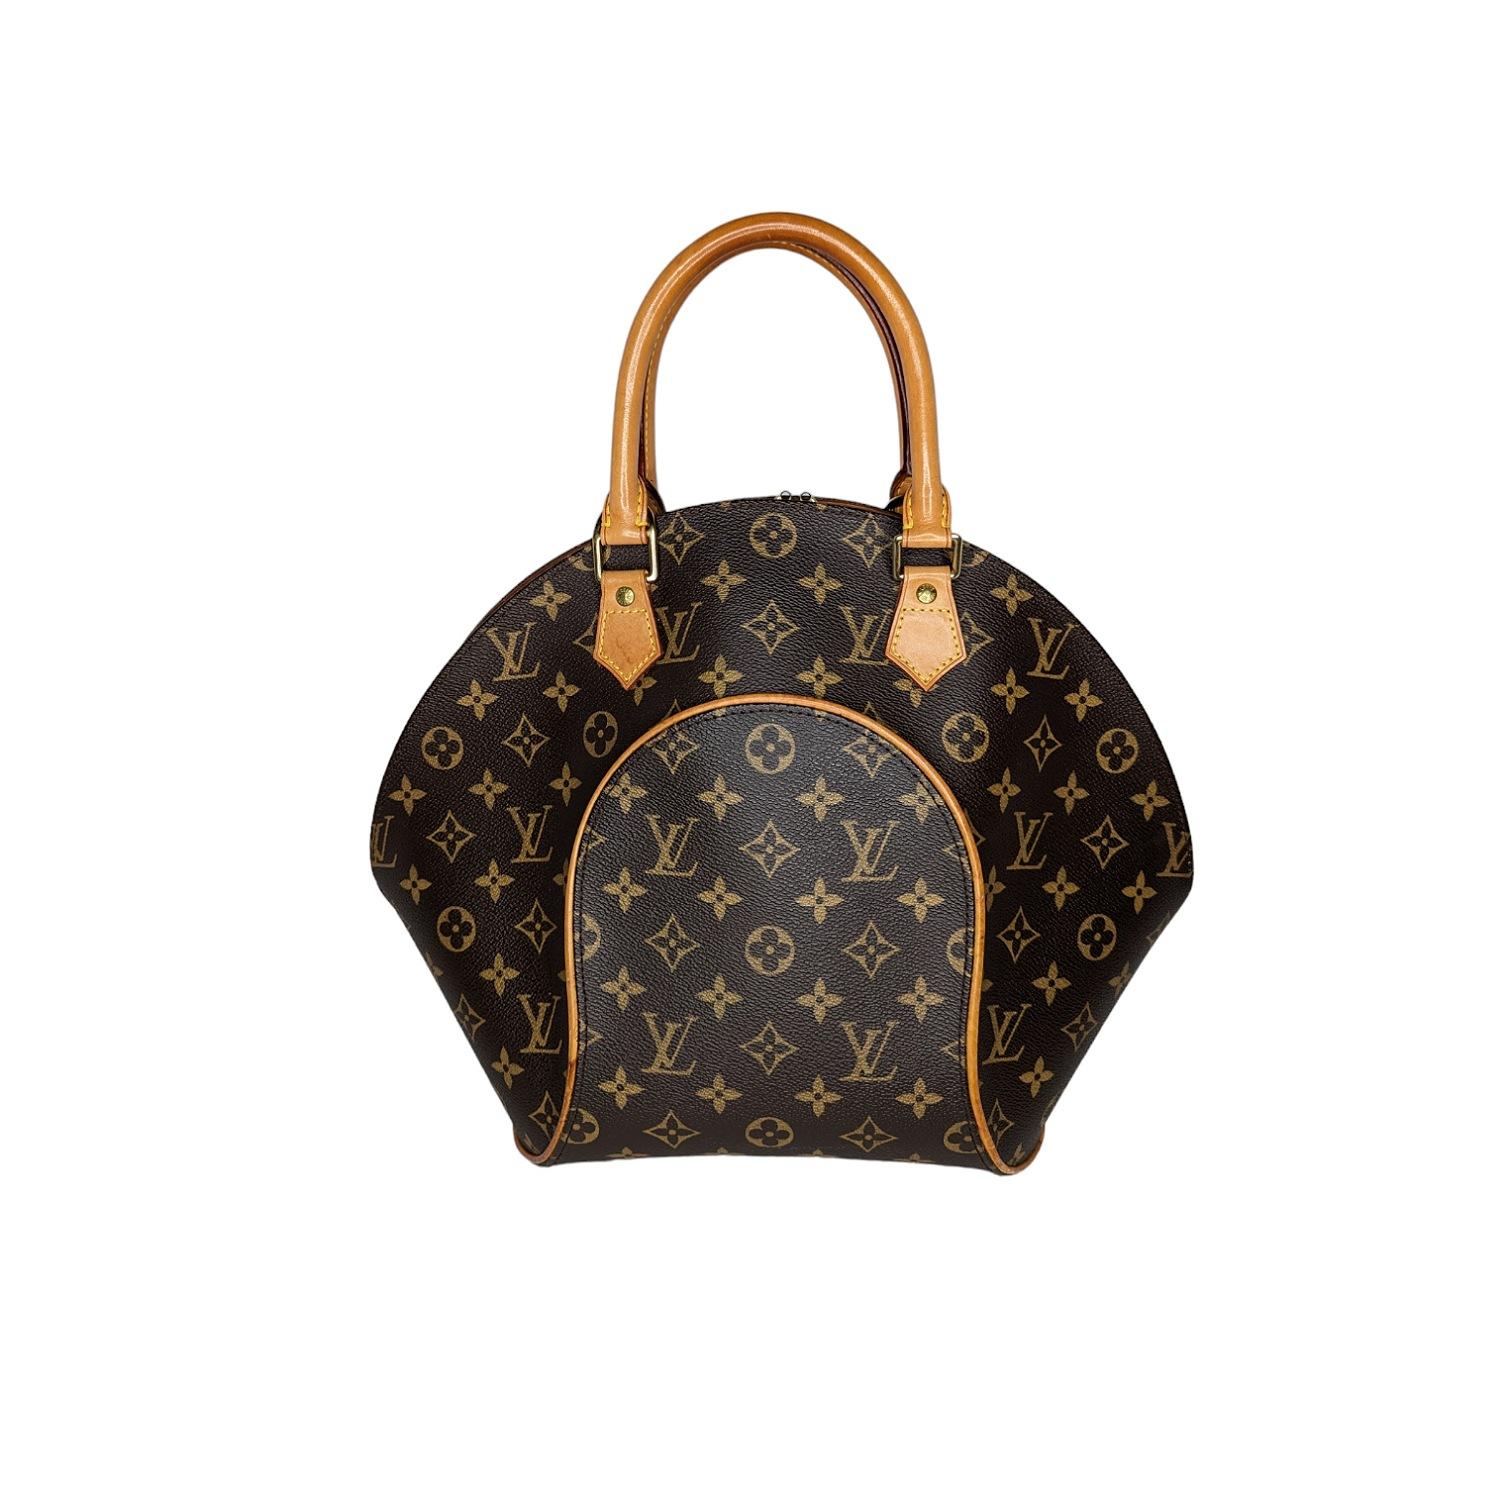 Louis Vuitton Monogram Ellipse MM. This is a chic vintage bowling style tote that is crafted of traditional Louis Vuitton monogram toile canvas. The bag features vachetta cowhide leather piping and strong durable handles with polished brass hardware